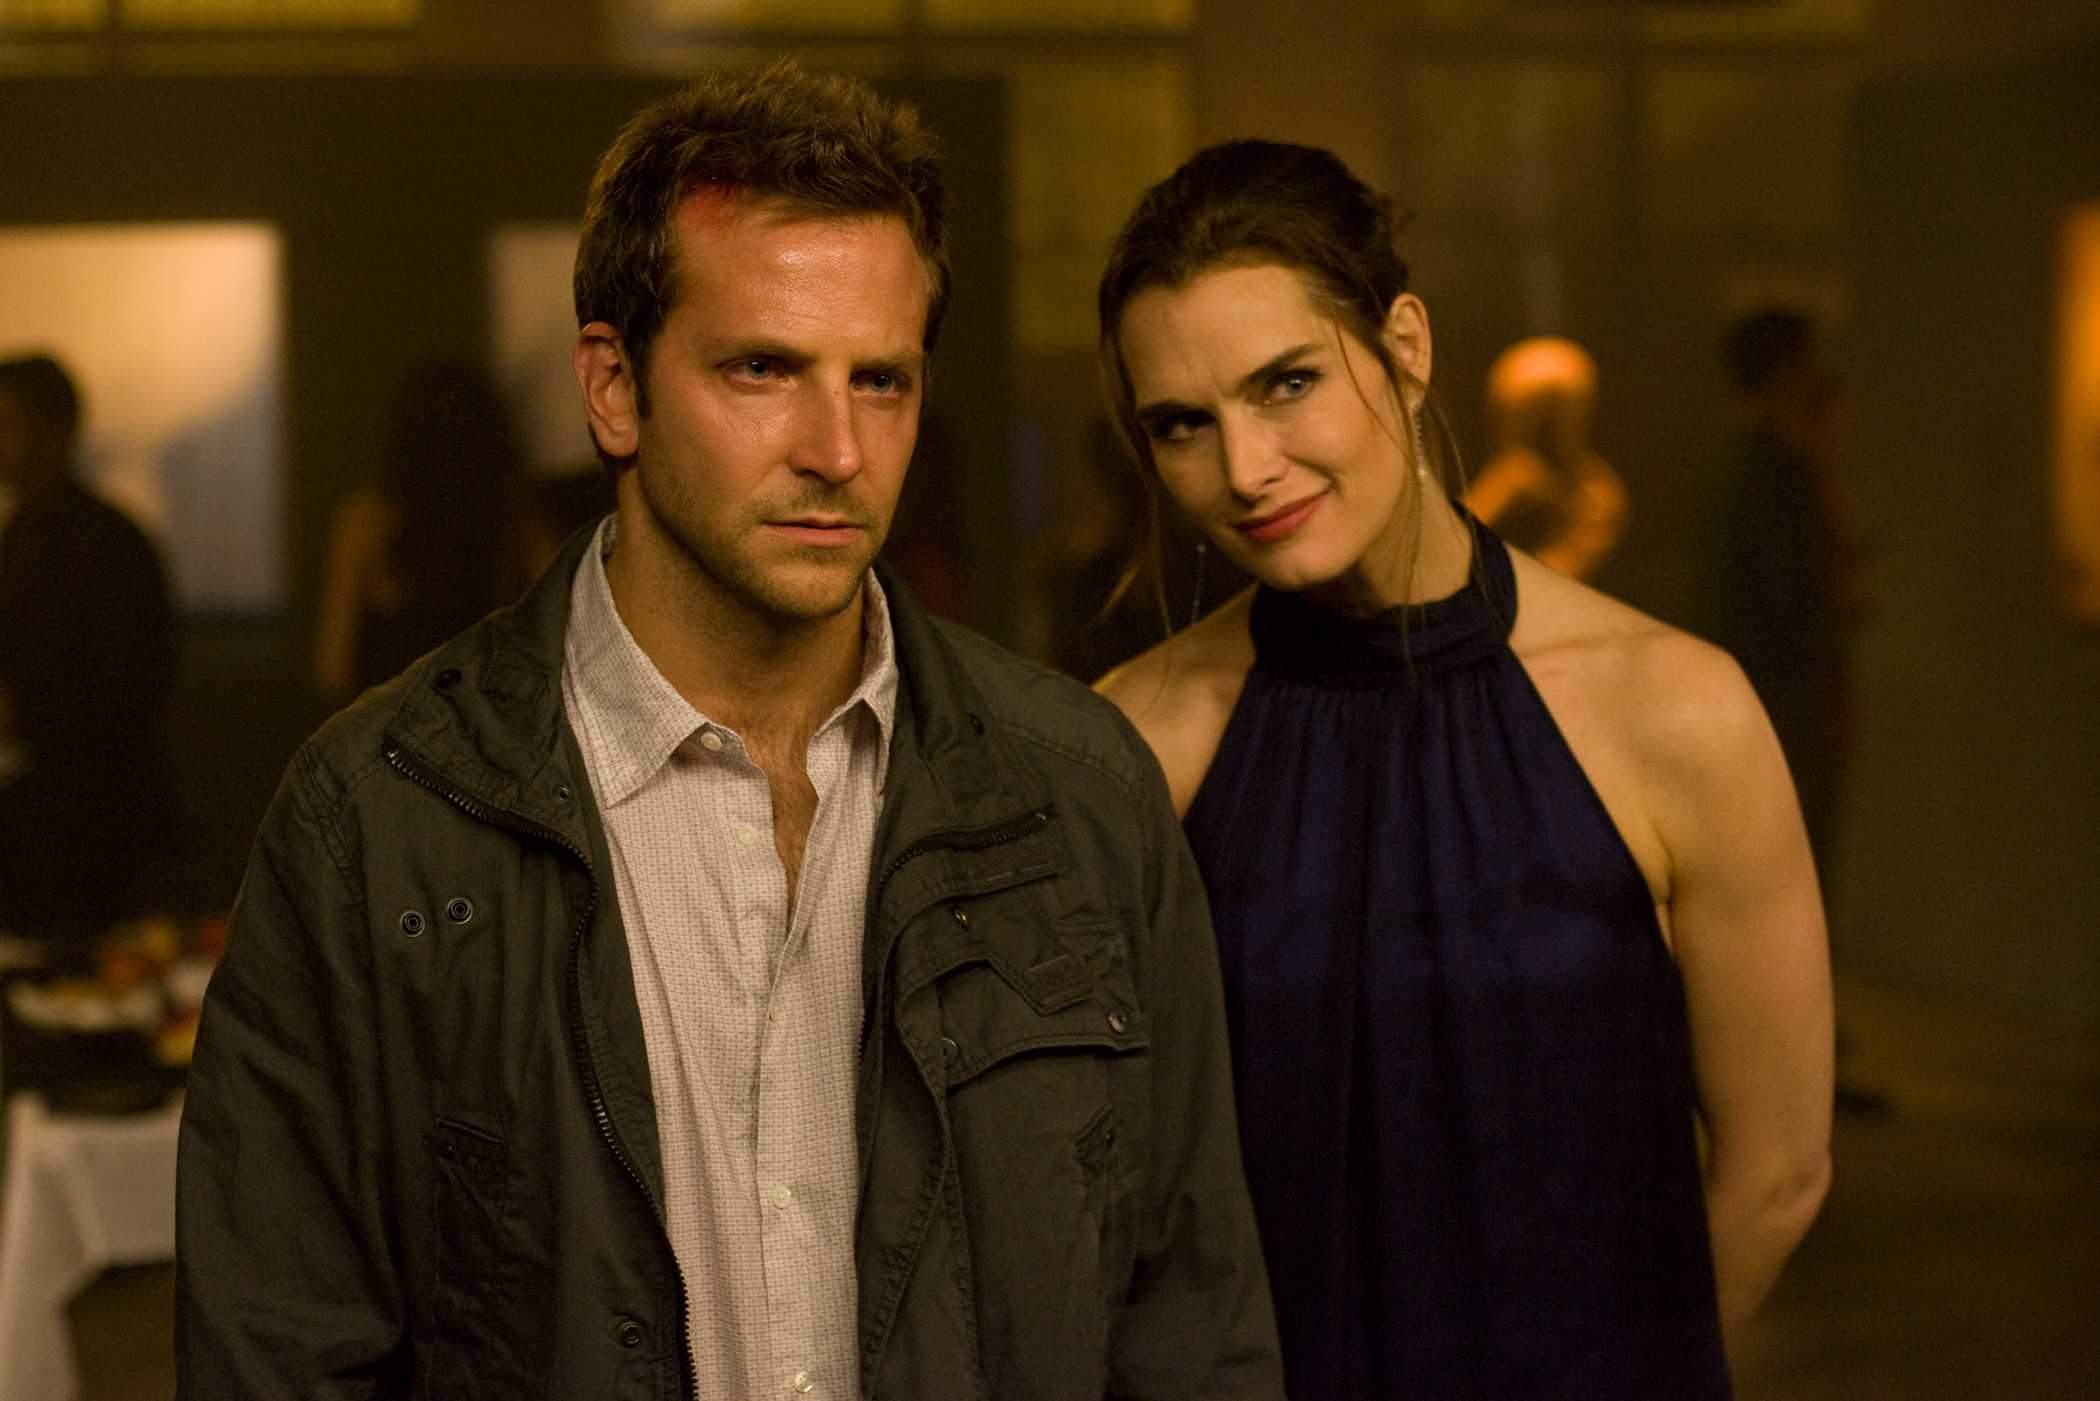 Leon (Bradley Cooper) and Susan Hoff (Brooke Shields) in THE MIDNIGHT MEAT TRAIN. Photo credit: Saeed Adyani.